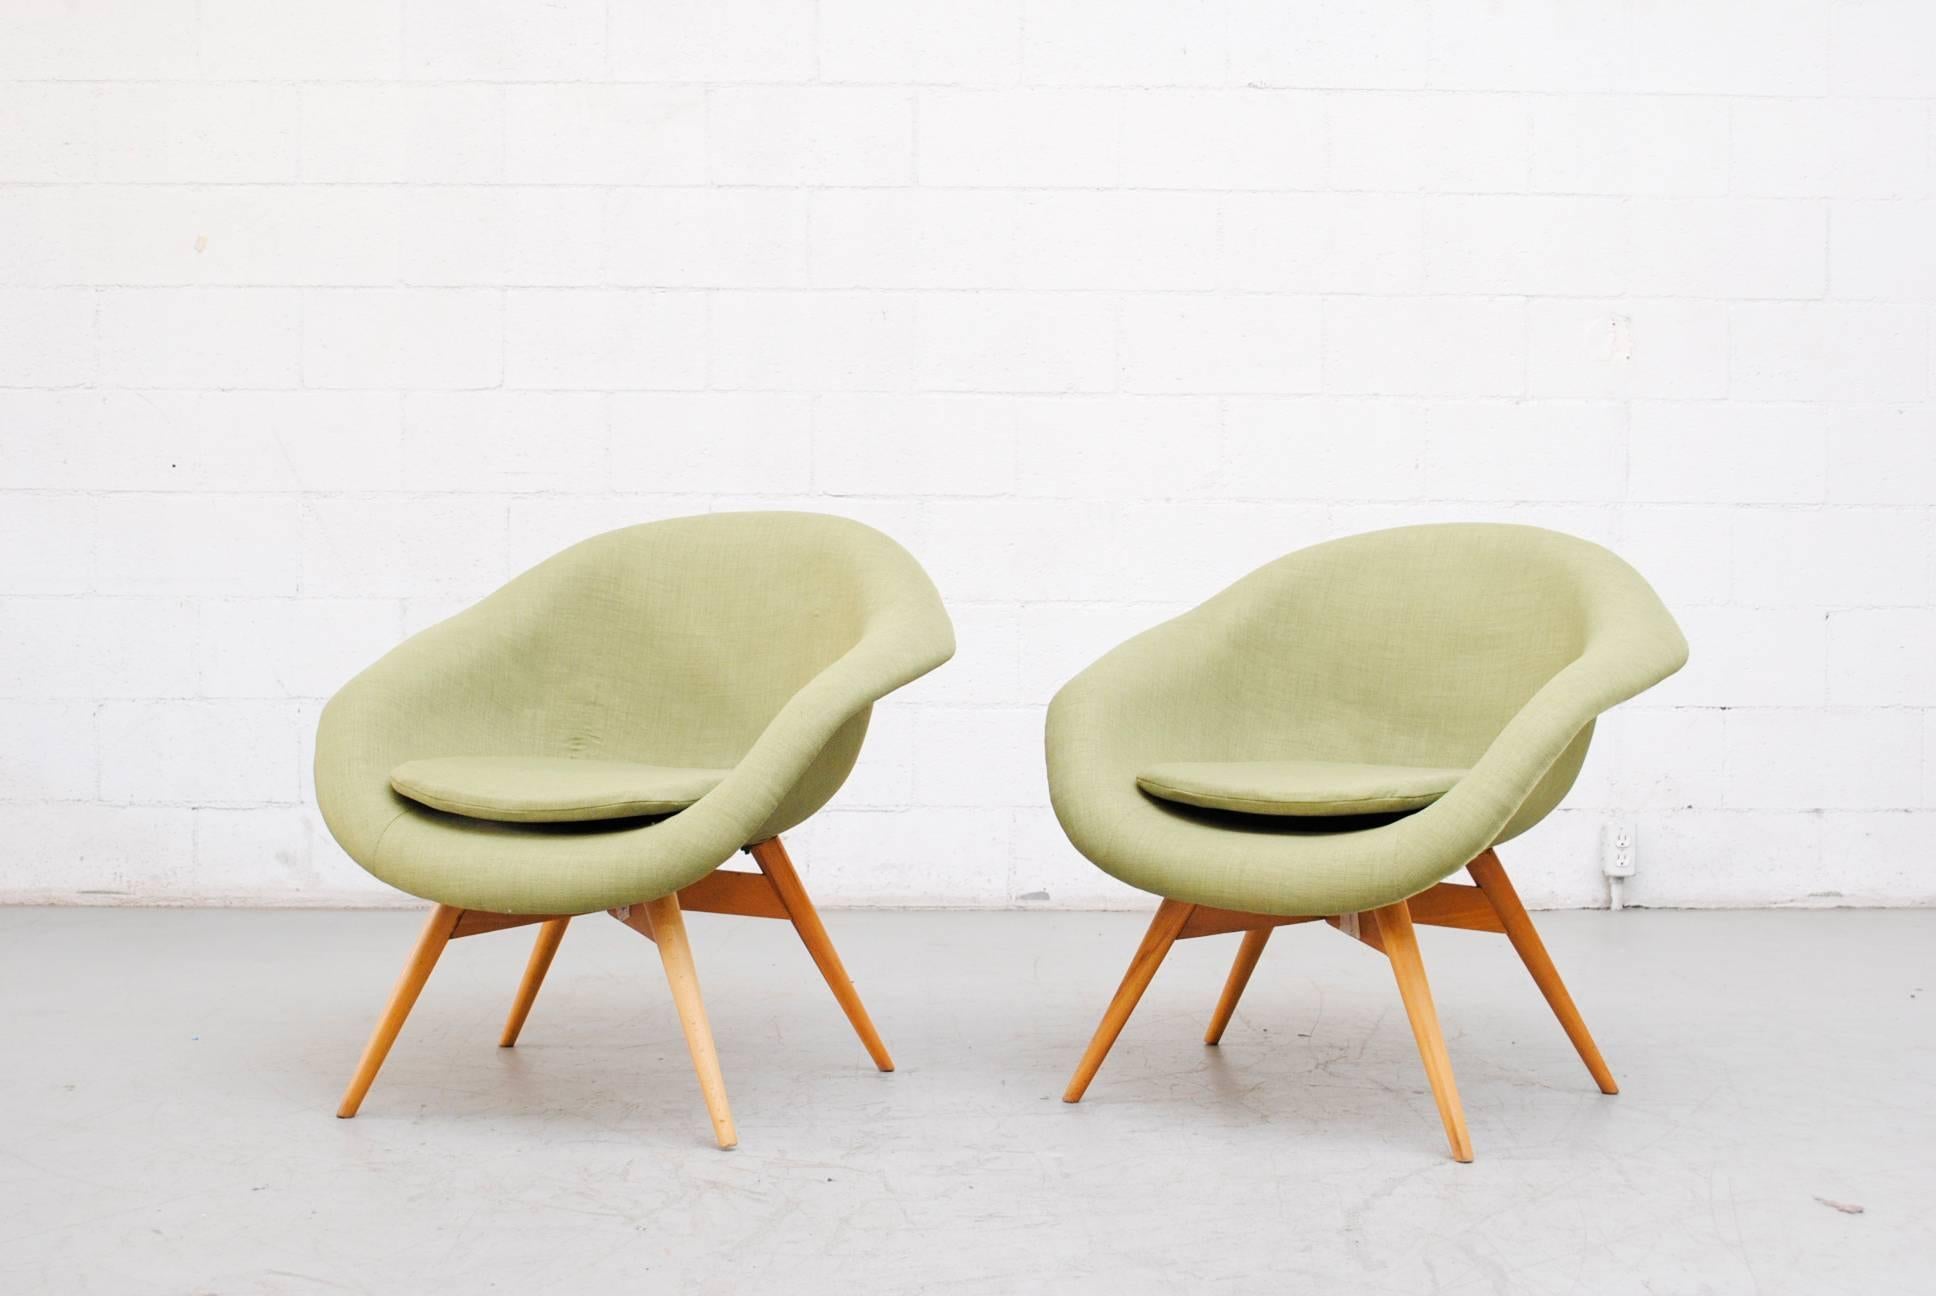 Newly upholstered pale green bucket chairs by Miroslav Navratil. Frames are in good original condition with visible wear to frame. Others available in assorted color colors. (Two available).